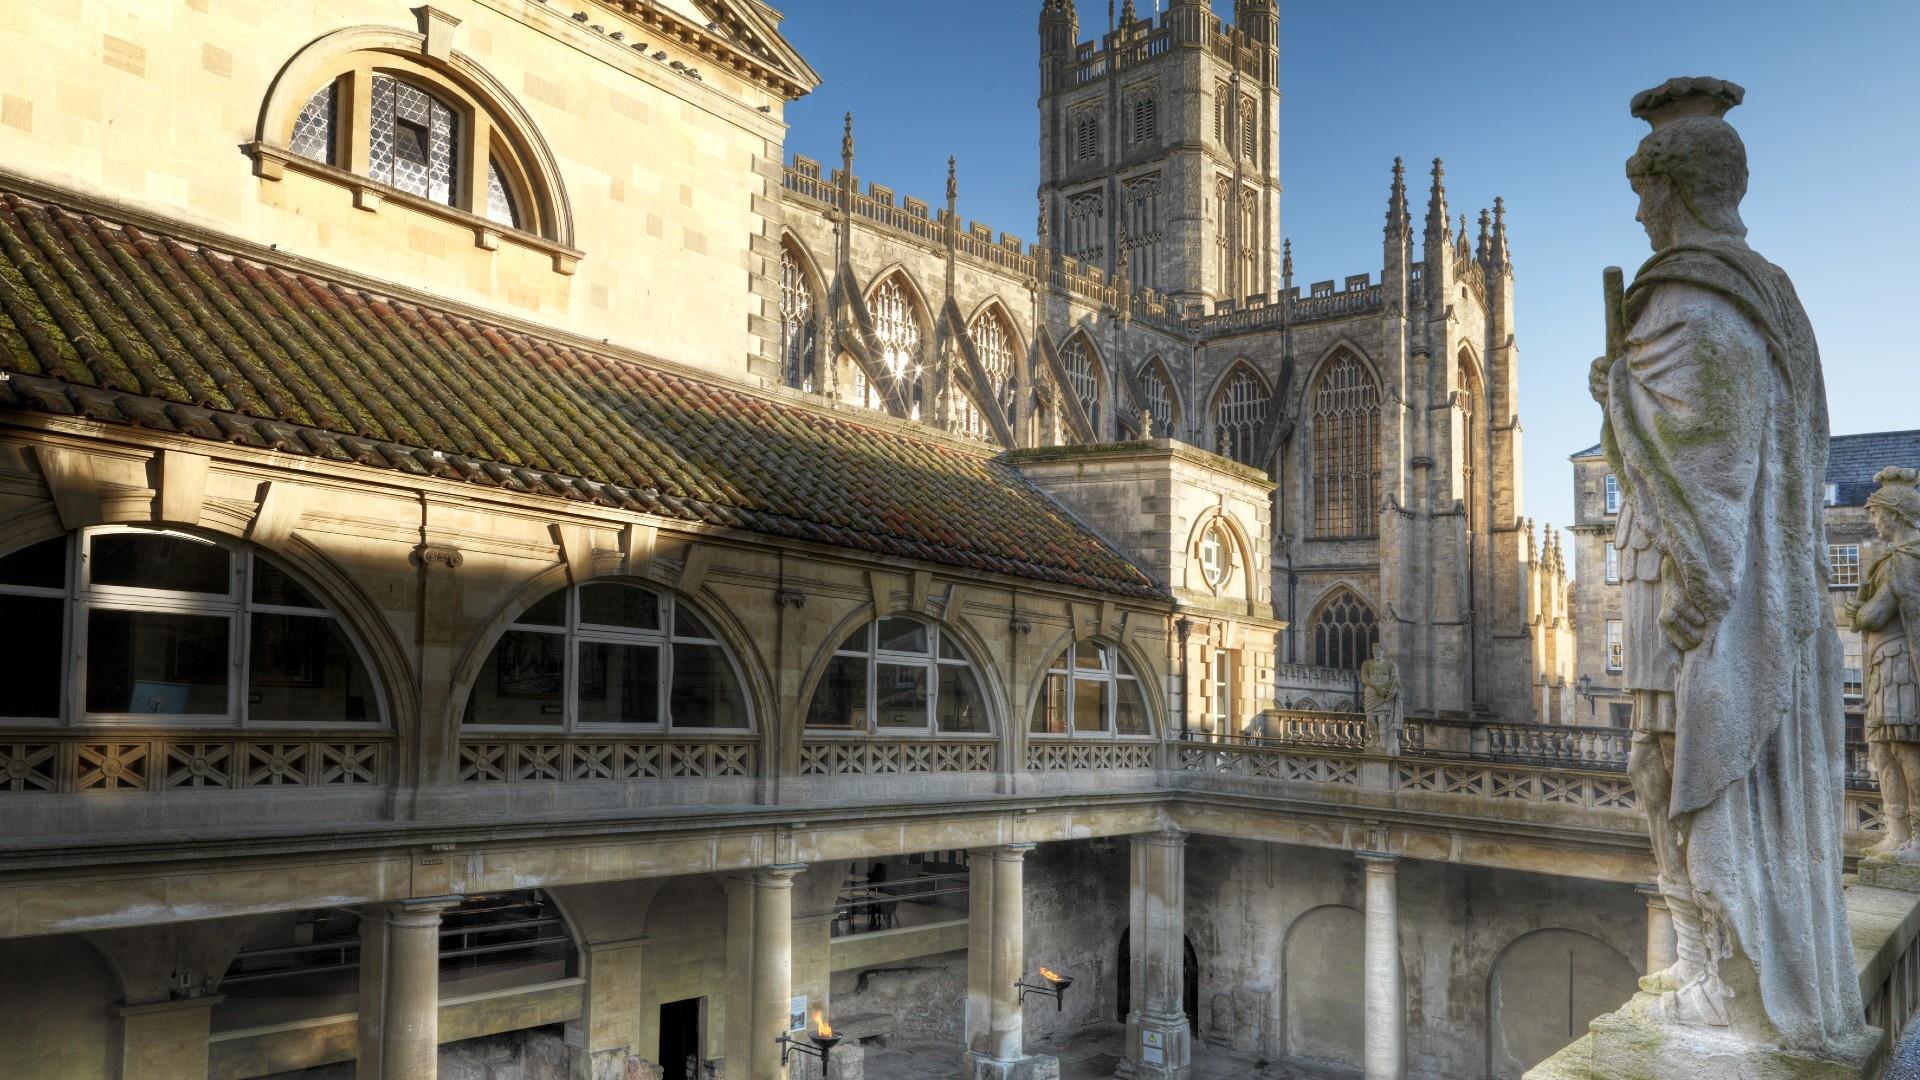 The rooftop of The Roman Baths, with Bath Abbey in the background